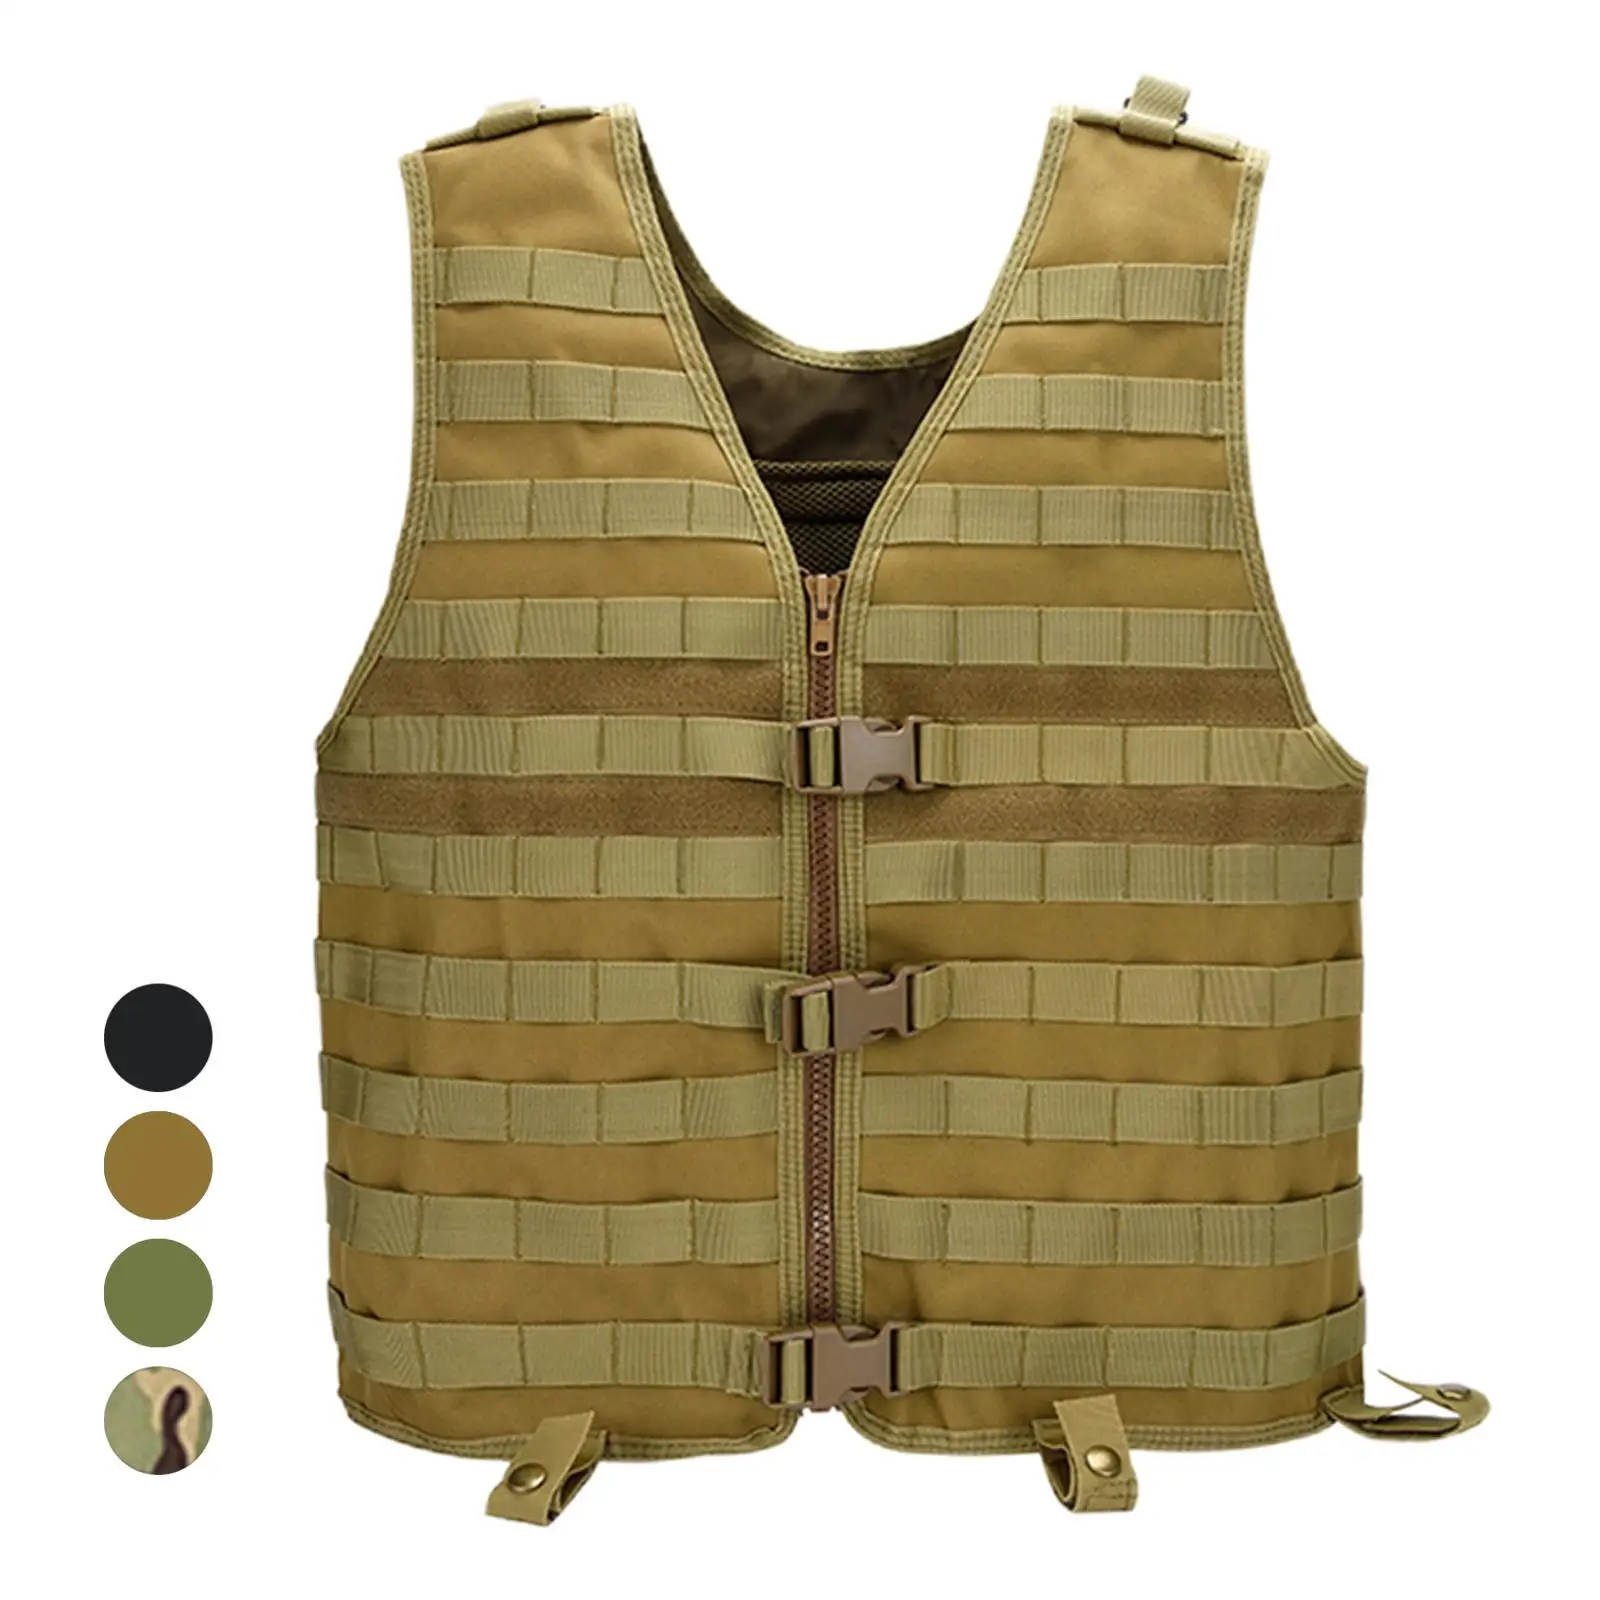 Hunting Vest Tactical JPC Molle Plate Carrier Vest Shrink Belt Outdoor CS Game Paintball Vest Military Protective Accessories